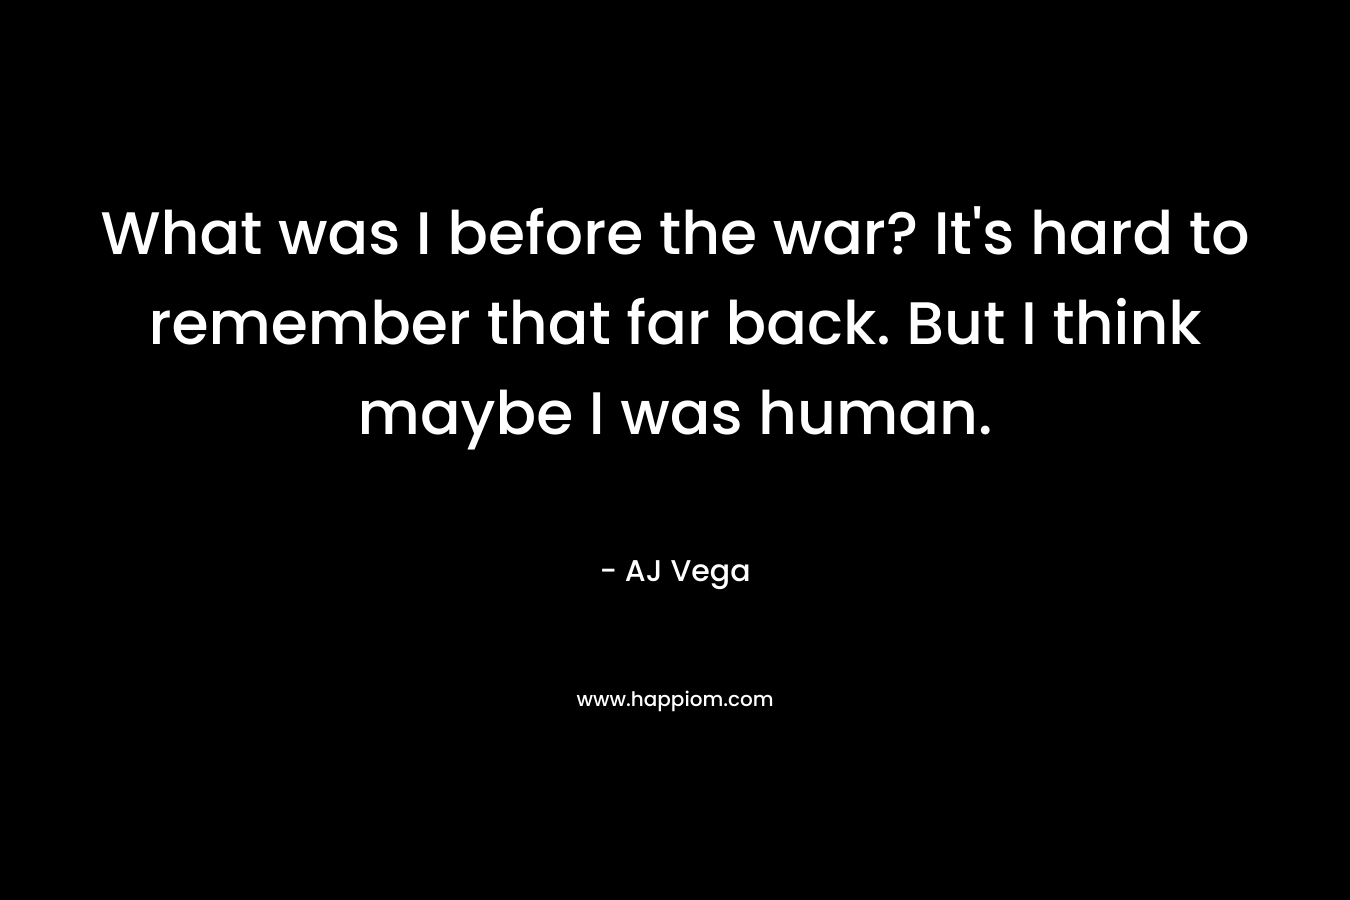 What was I before the war? It's hard to remember that far back. But I think maybe I was human.